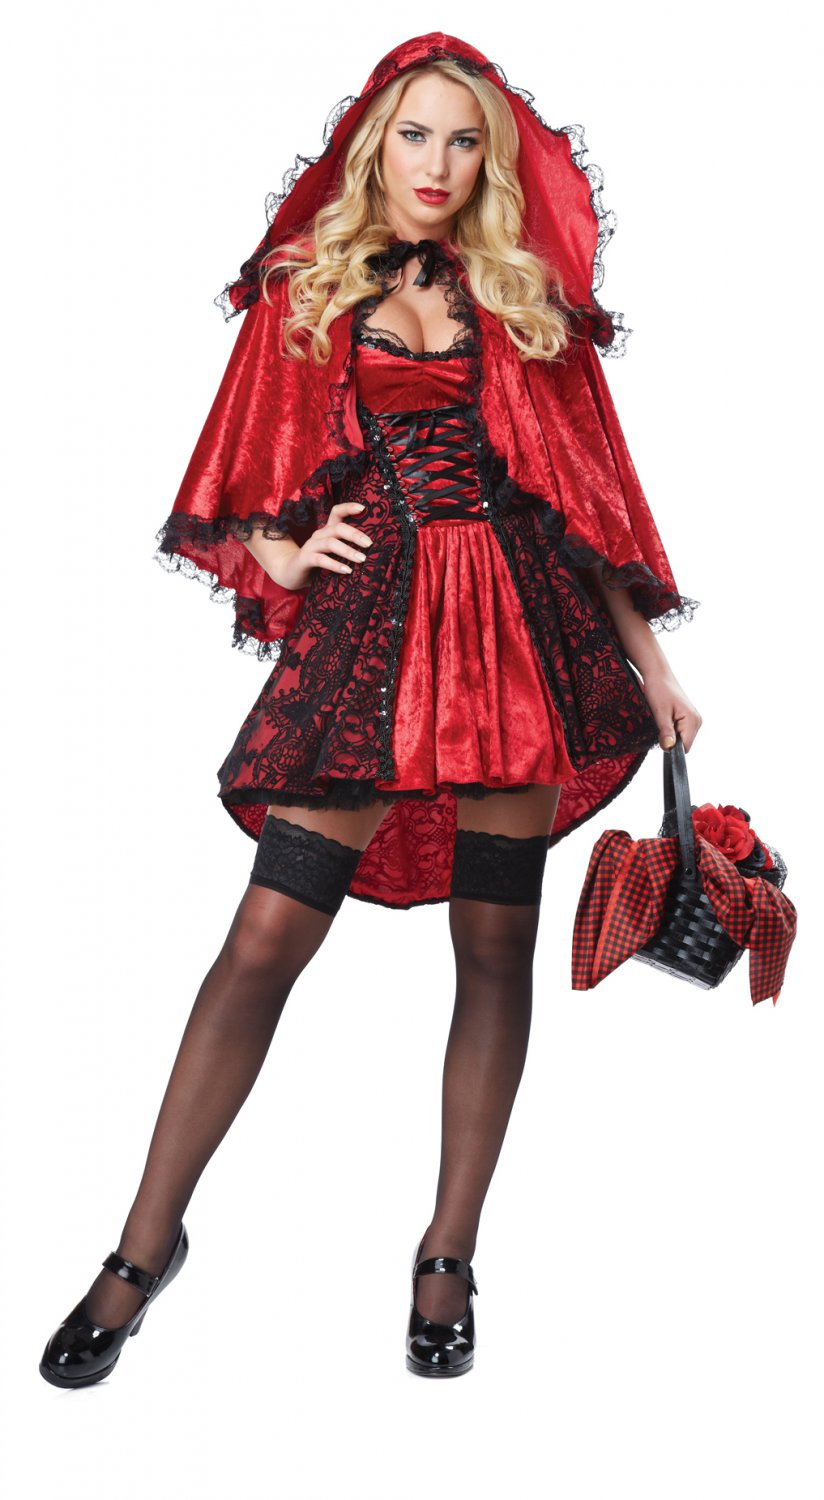 Dark Gothic Deluxe Red Riding Hood Adult Costume Size Small 01300 9096